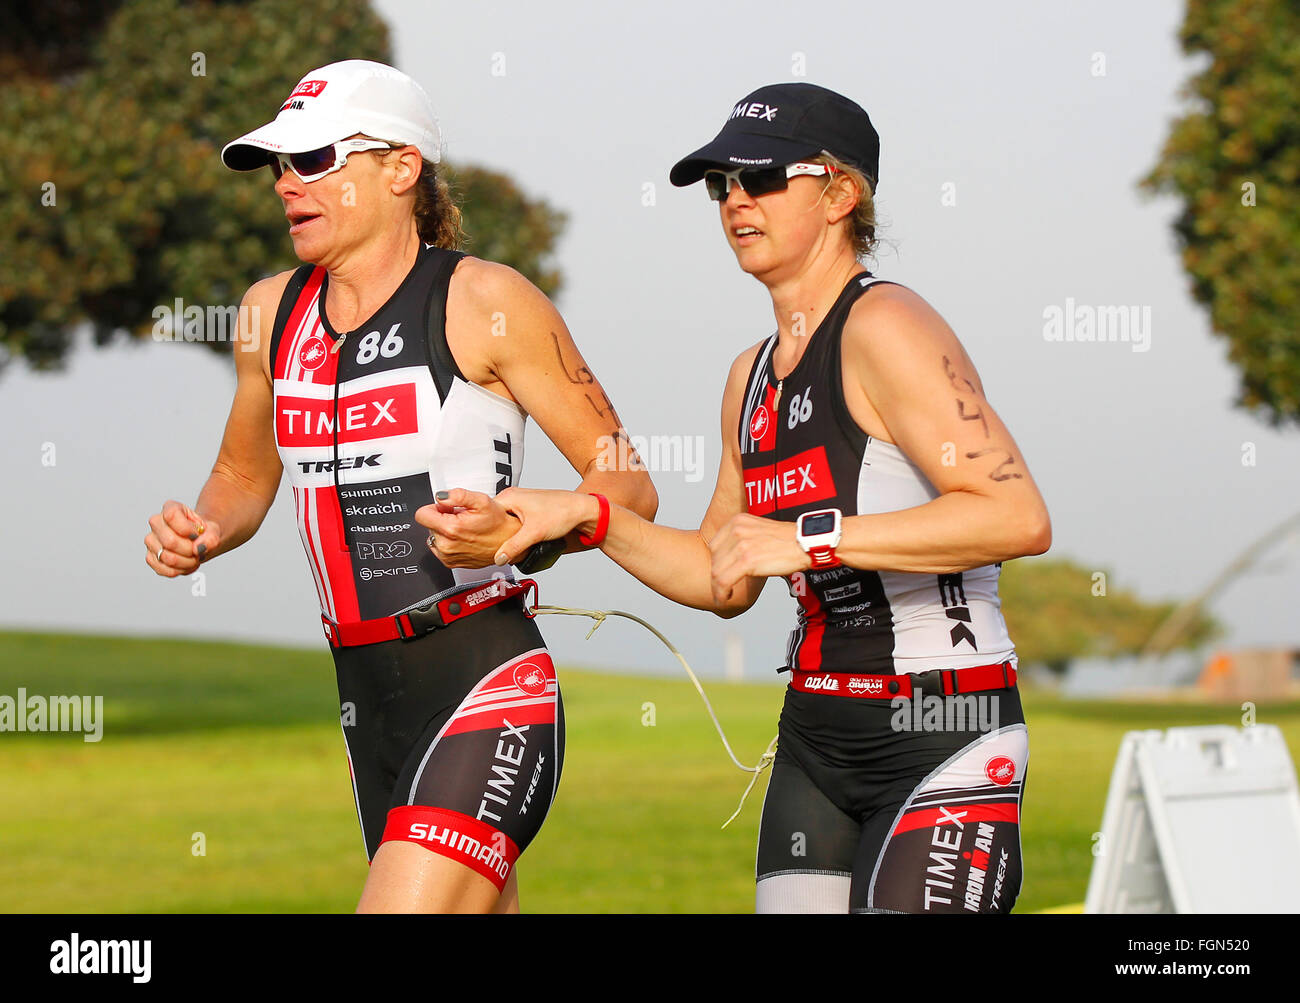 San Diego, California, USA. 21st February, 2016. Susanne Davis, left, and Amy Dixon, a blind triathlete prepare to jump up a curb as they compete in the running portion of the Tritonman triathlon in Mission Bay. | Dixon is training for the Paralympics in Rio de Janeiro and Davis, a world Ironman Champion, is her guide and training partner. This was their first competition training together. (K.C. Alfred/ San Diego Union-Tribune Credit:  K.C. Alfred/U-T San Diego/ZUMA Wire/Alamy Live News Stock Photo